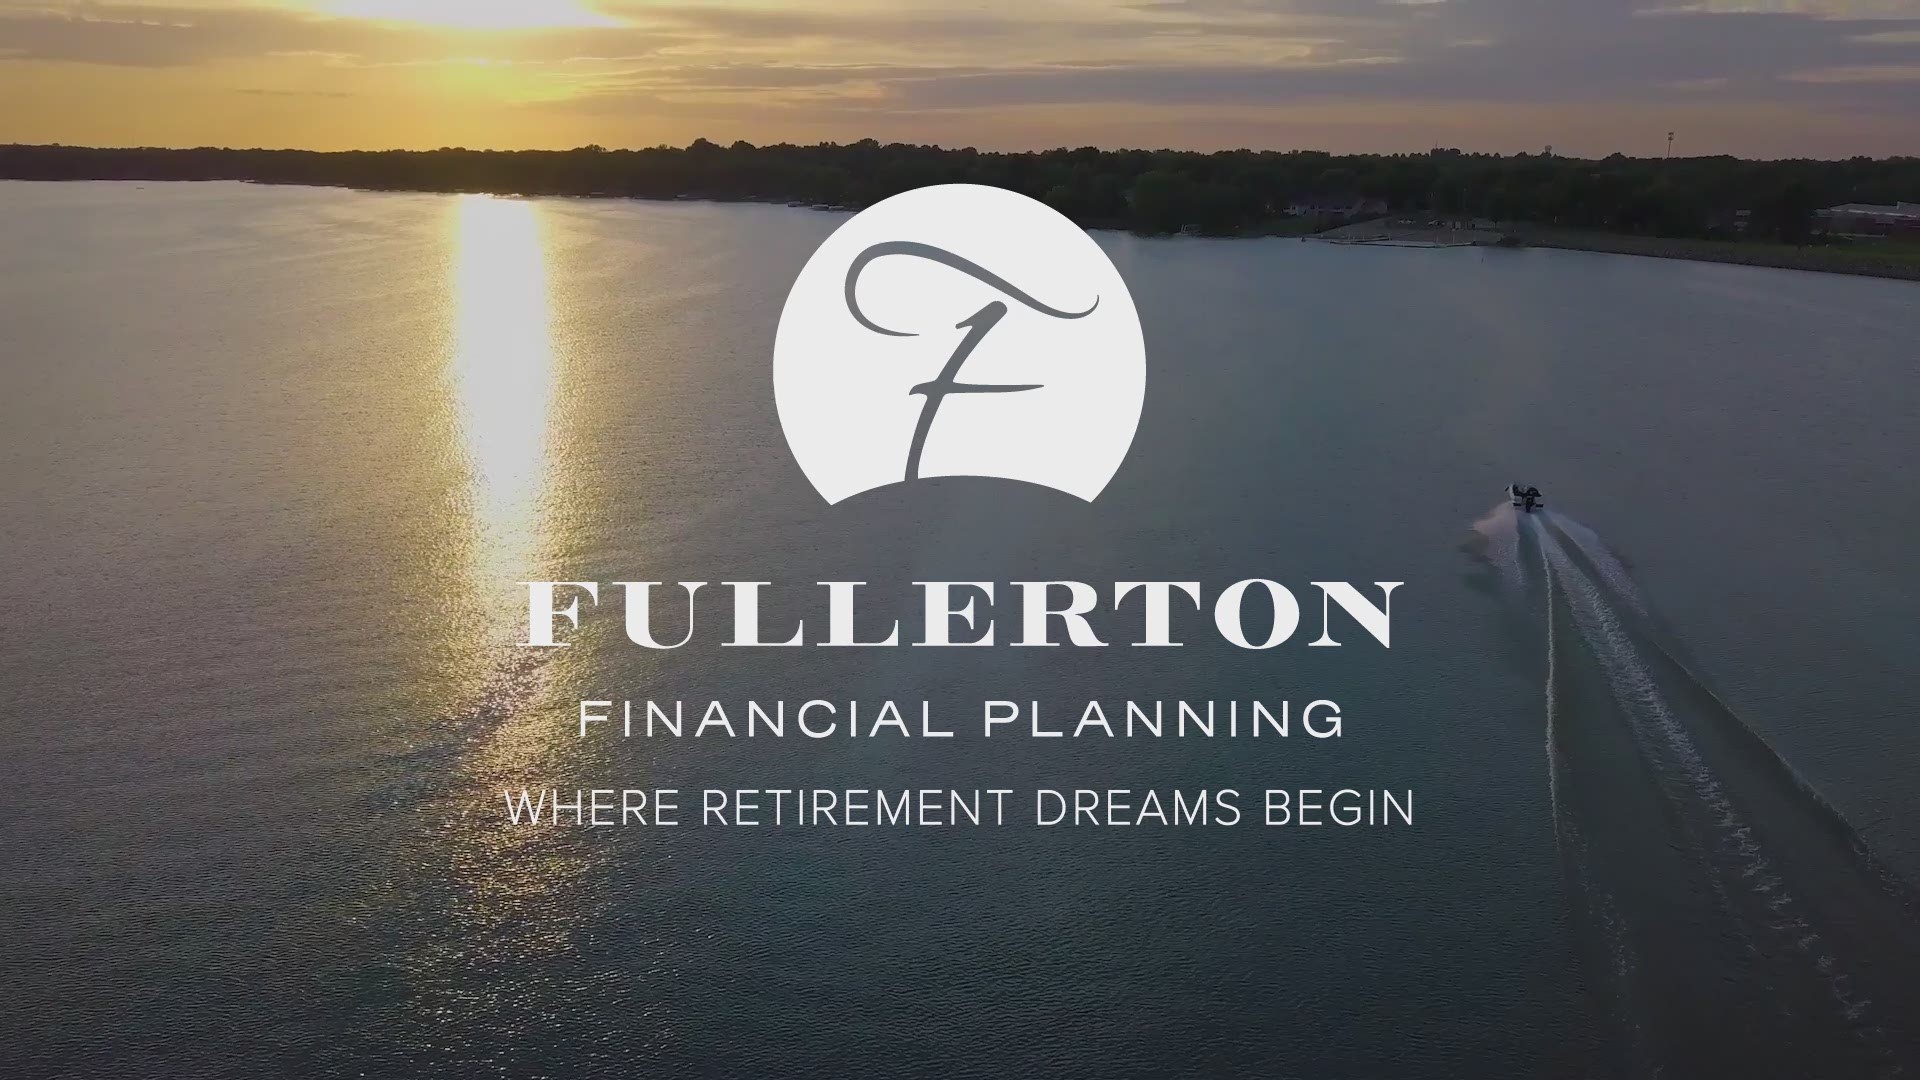 Fullerton Financial gives some guidance on how to plan for medical emergencies